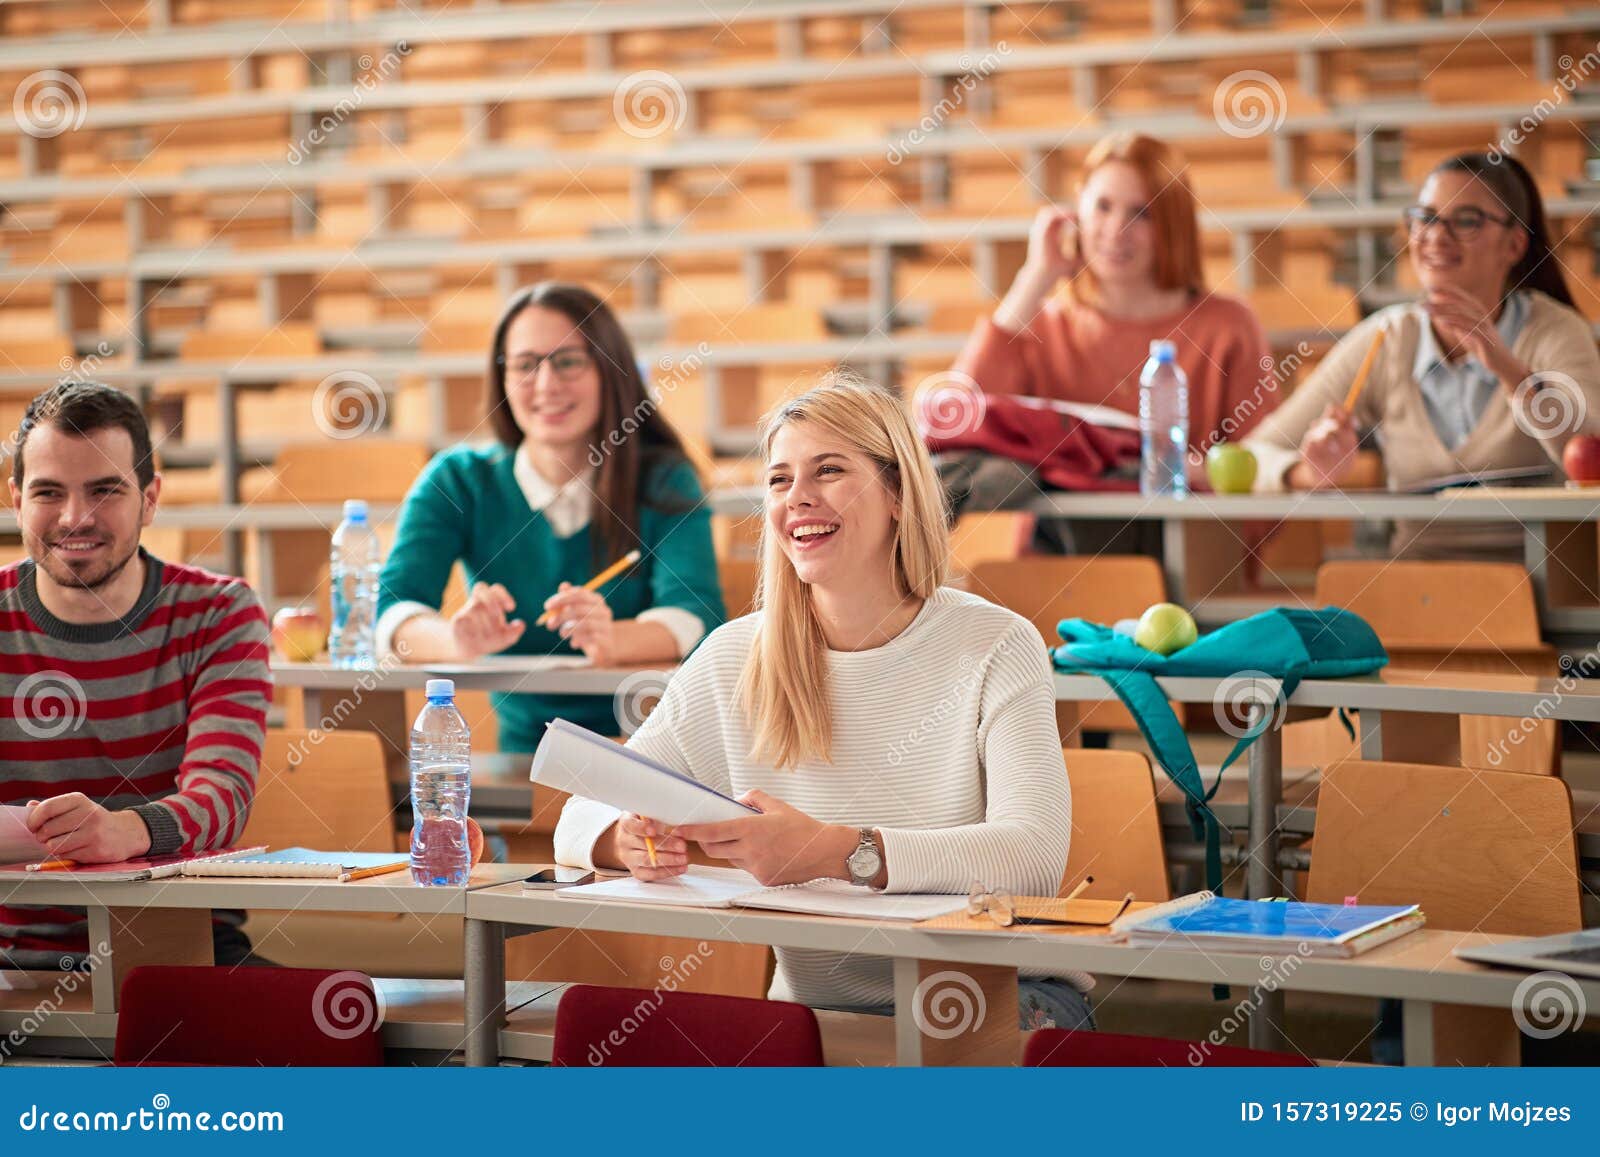 young college students on university education